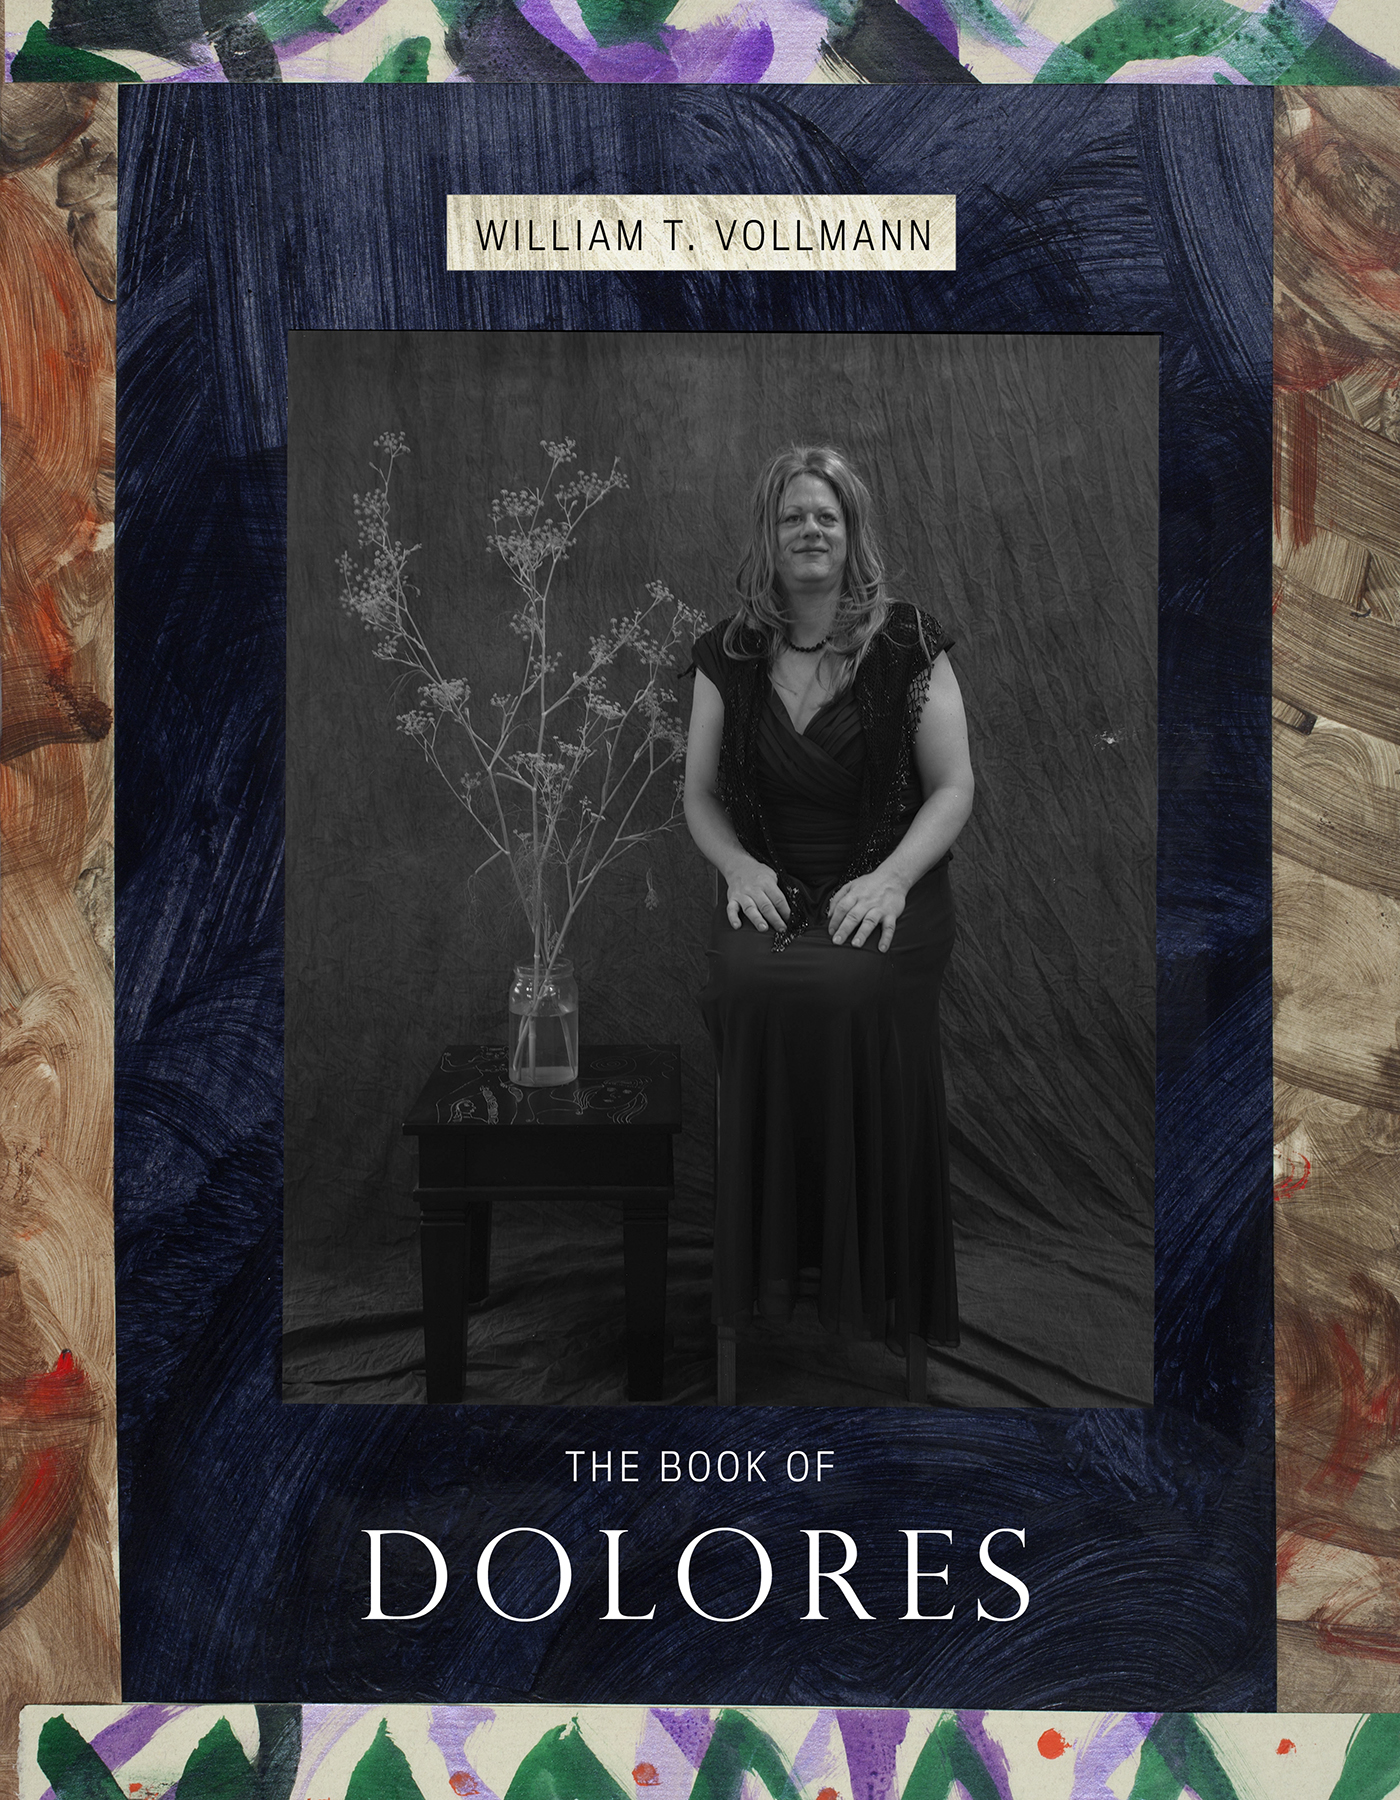 powerHouse Book Launch: The Book of Dolores by William T. Vollmann